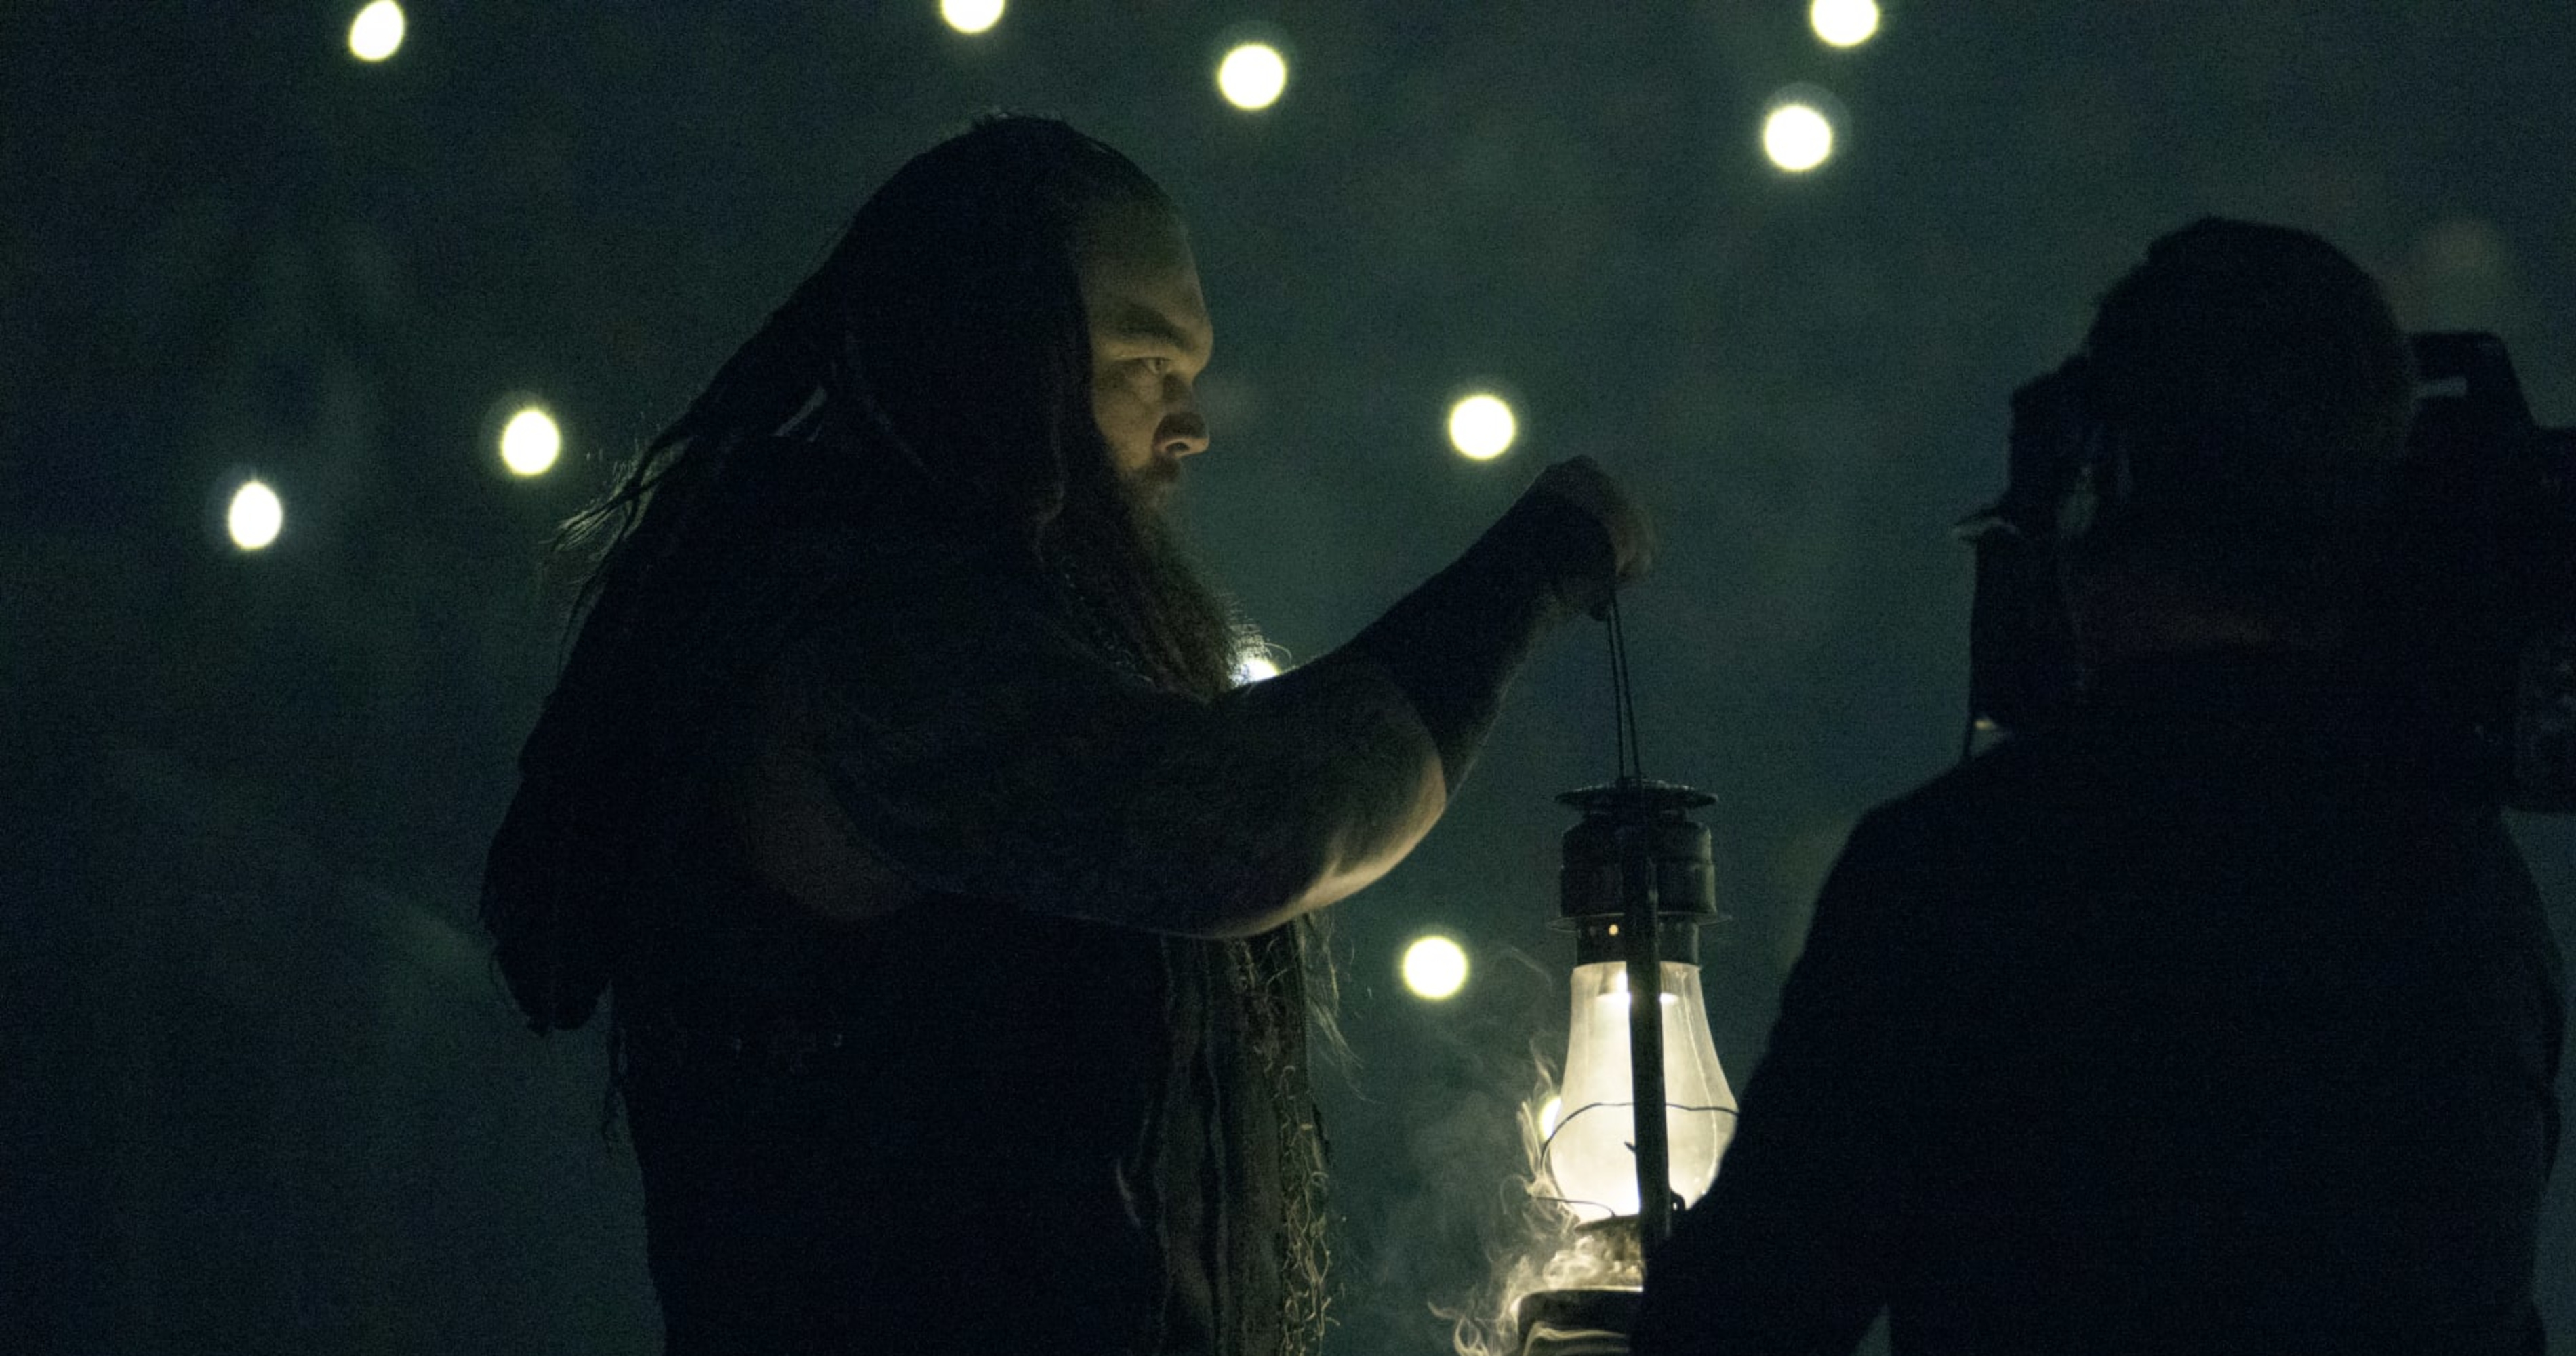 Report: Bray Wyatt Received Contract Offers from AEW, Impact and AAA After WWE Exit